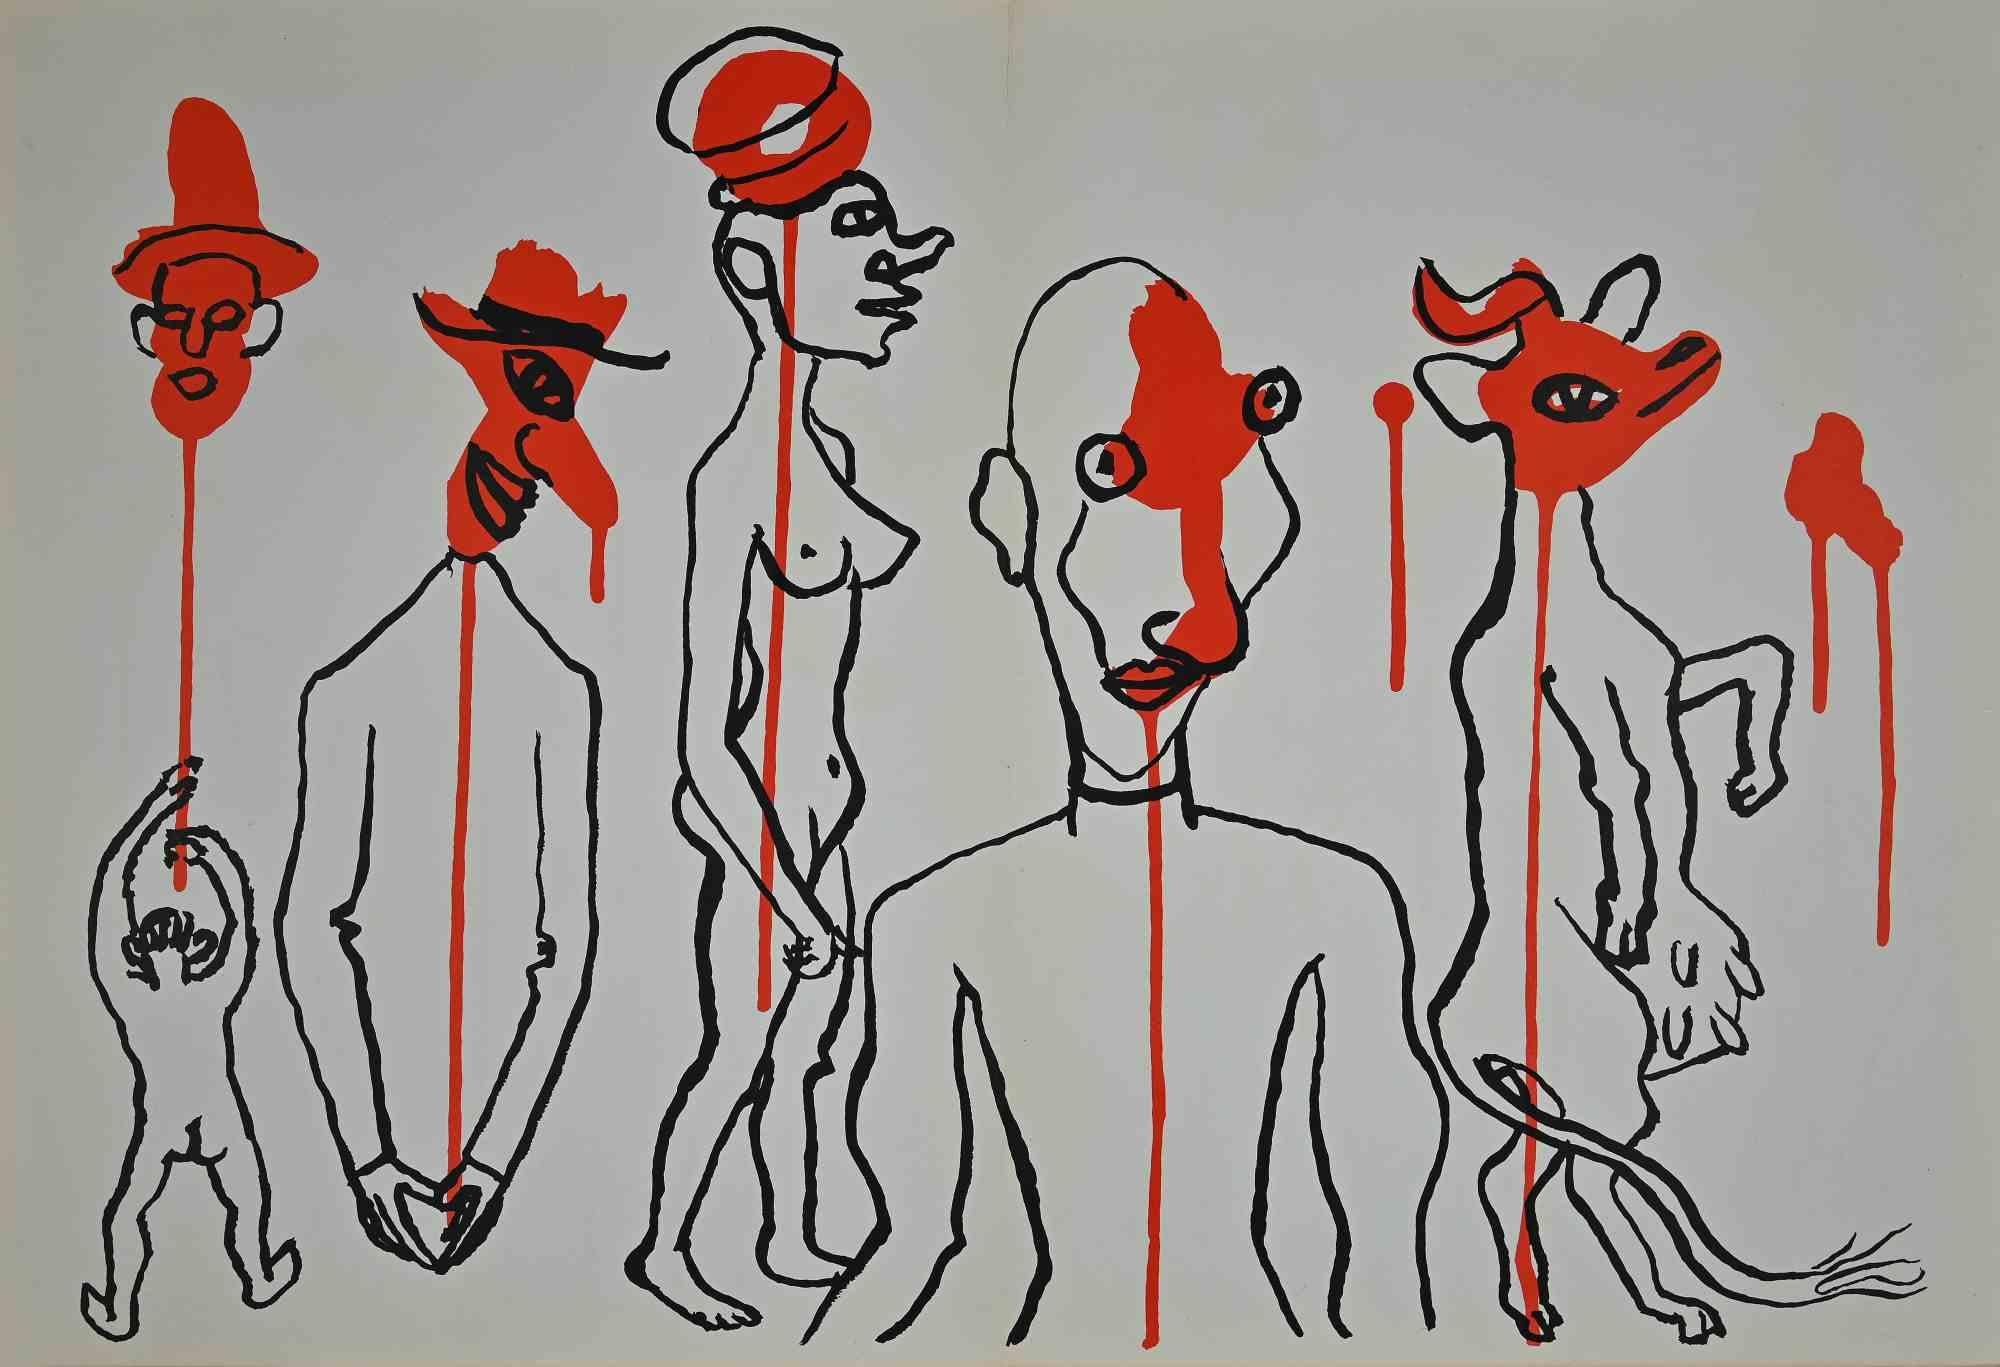 People is an original artwork realized by Alexander Calder in 1966.

Original mix colored lithograph on double page.

The artwork was the cover design for the art review "Derriere Le Miroir" N. 156. Printed by Ateliers de Maeght, Paris, 1966

Good